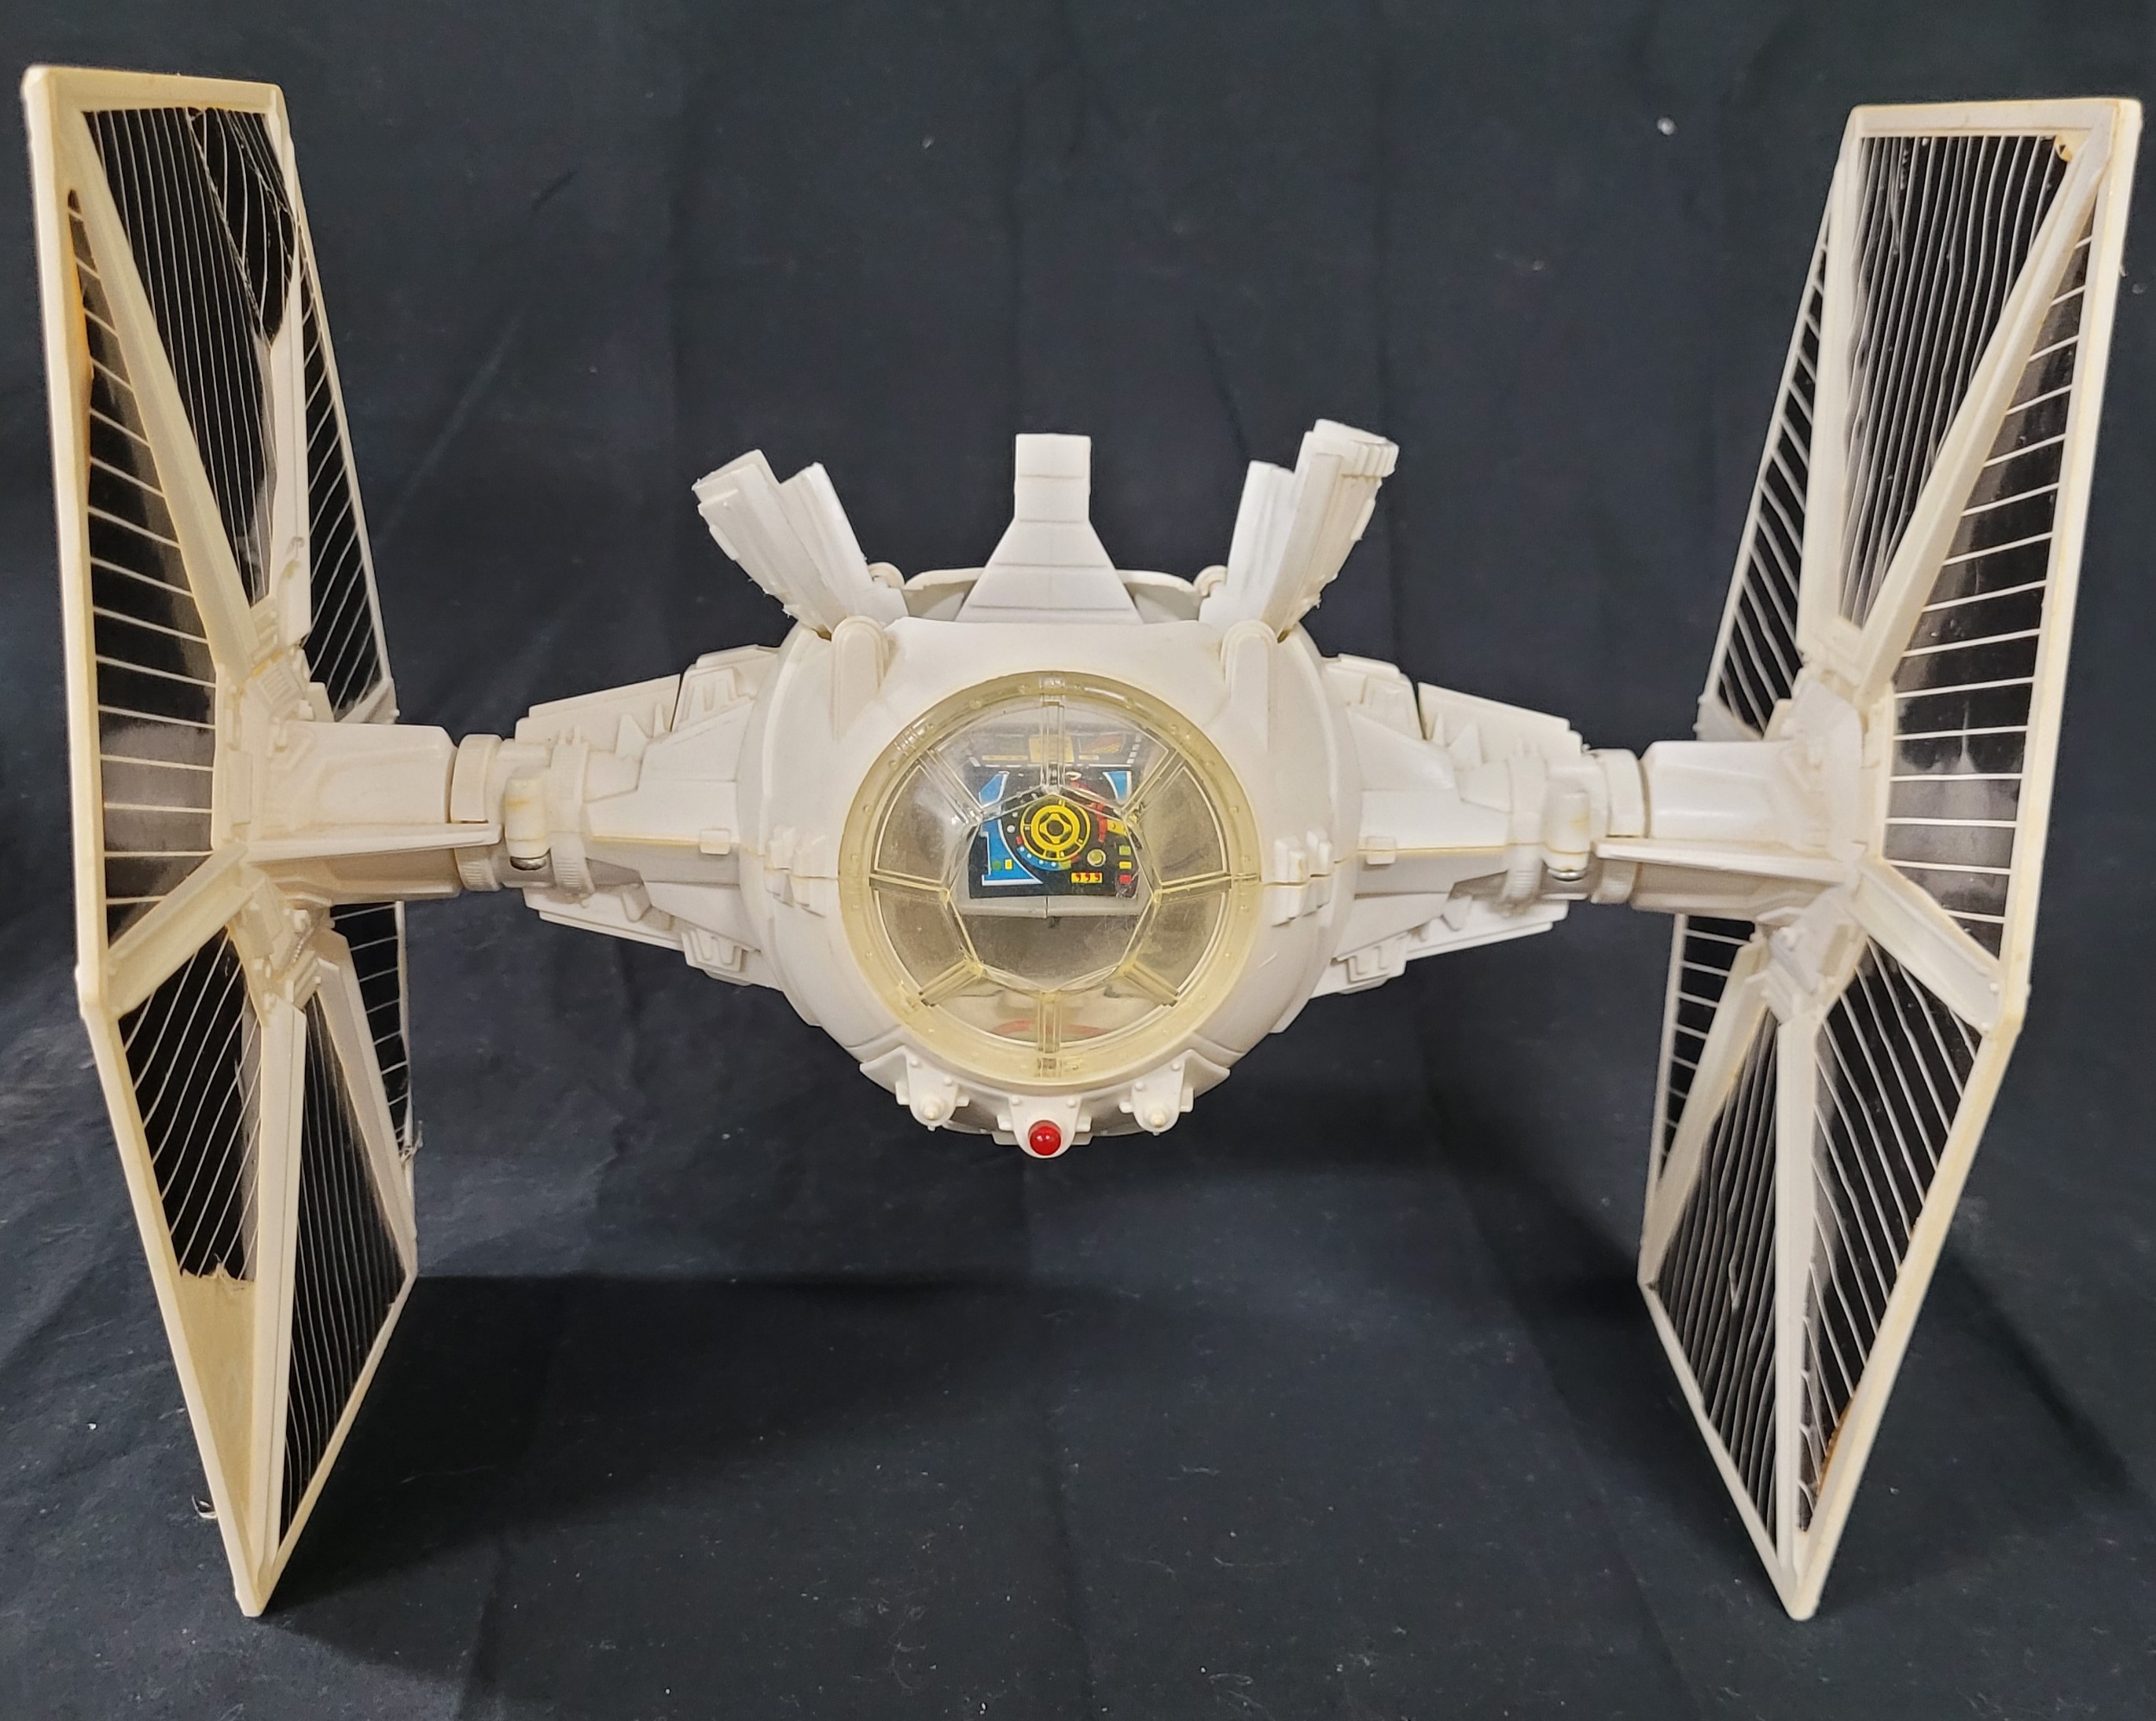 1978 Star Wars Tie Fighter Complete Vehicle Pre-Owned